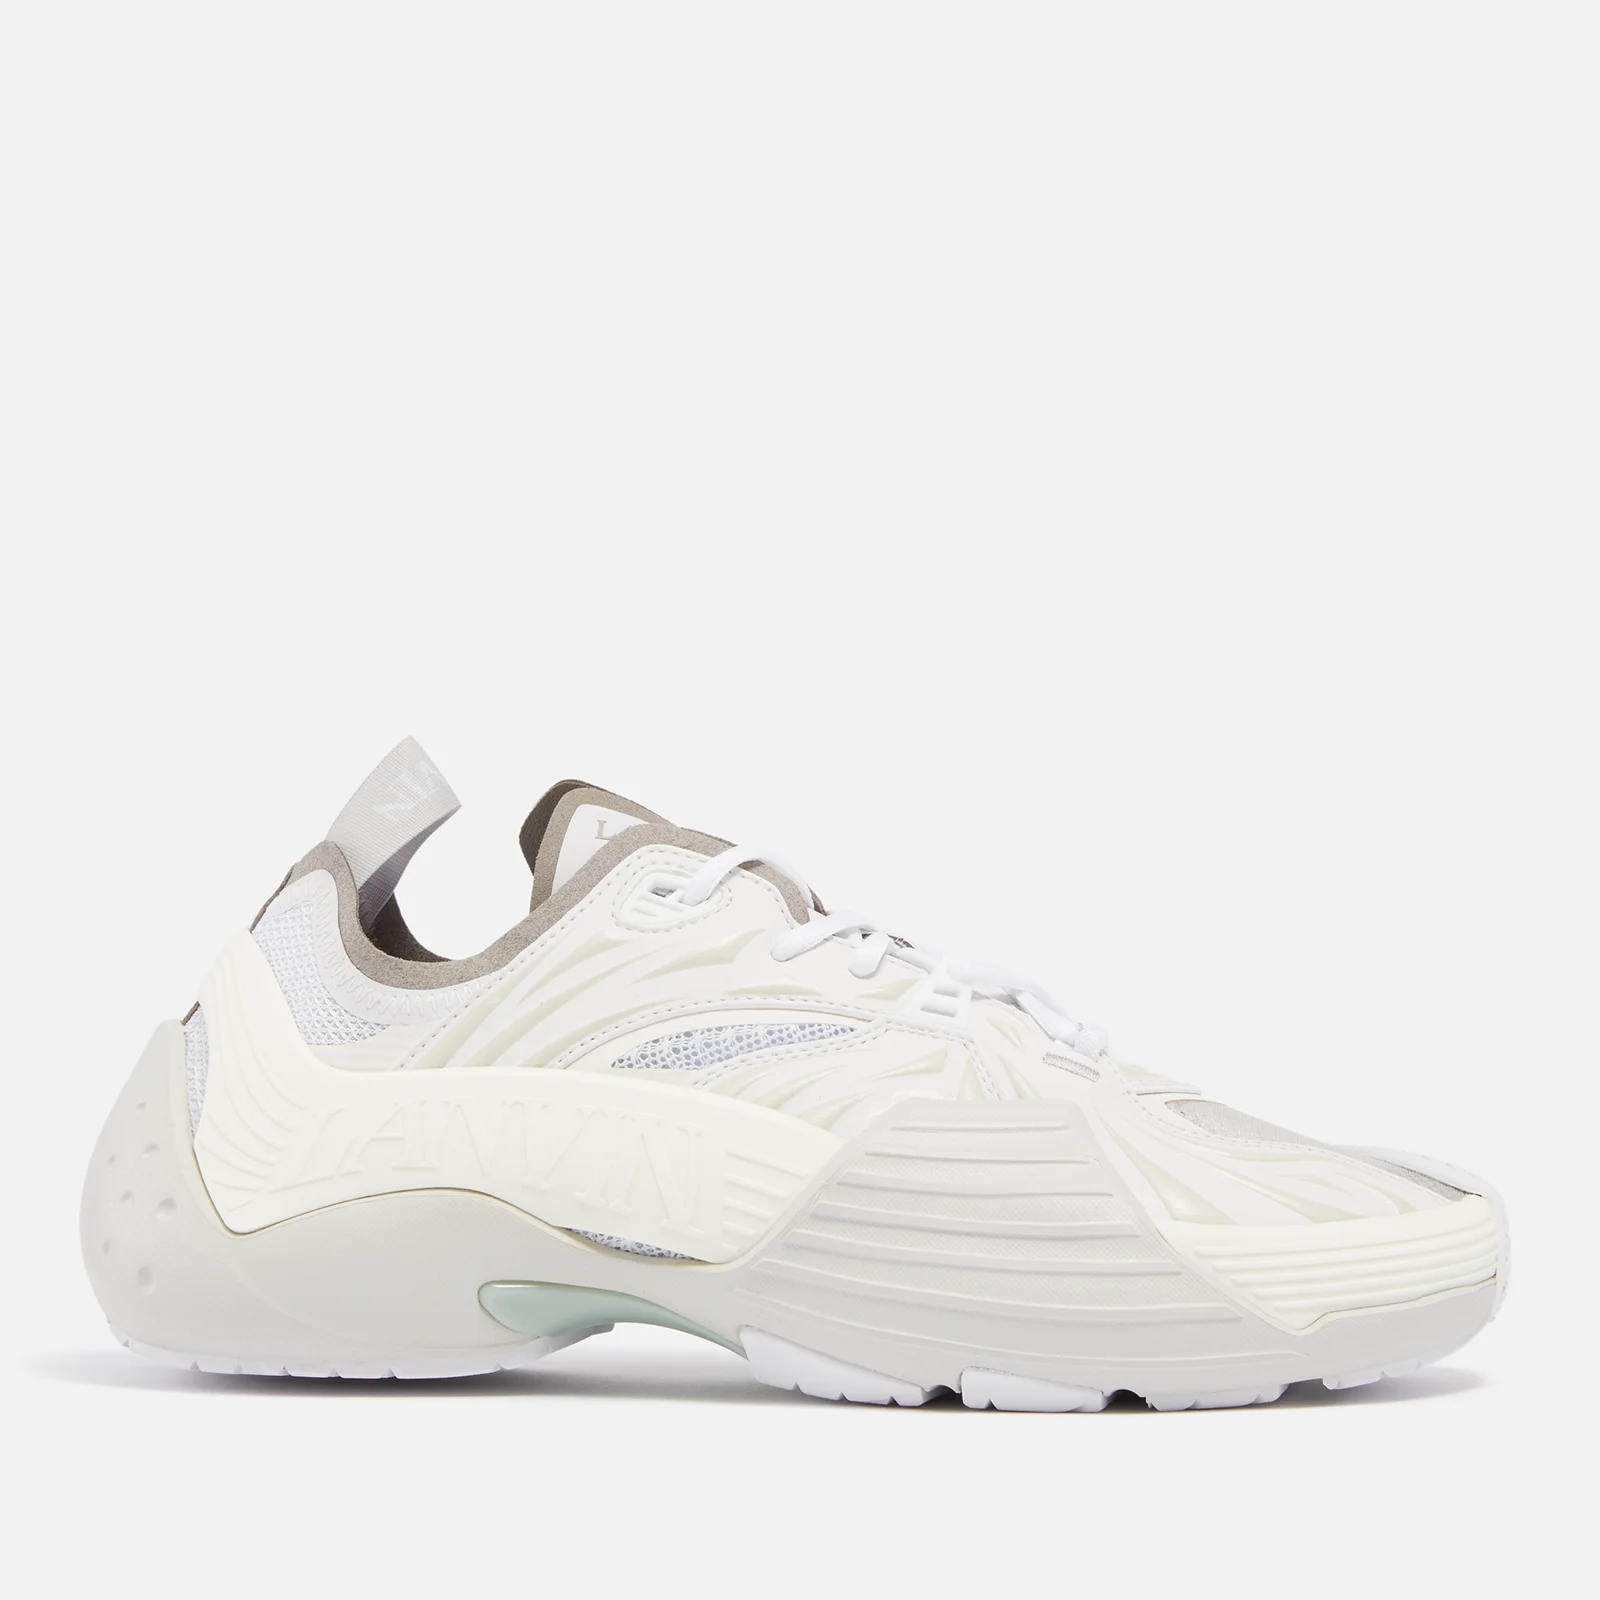 Lanvin Men's Flash X Mesh and Rubber Trainers Image 1